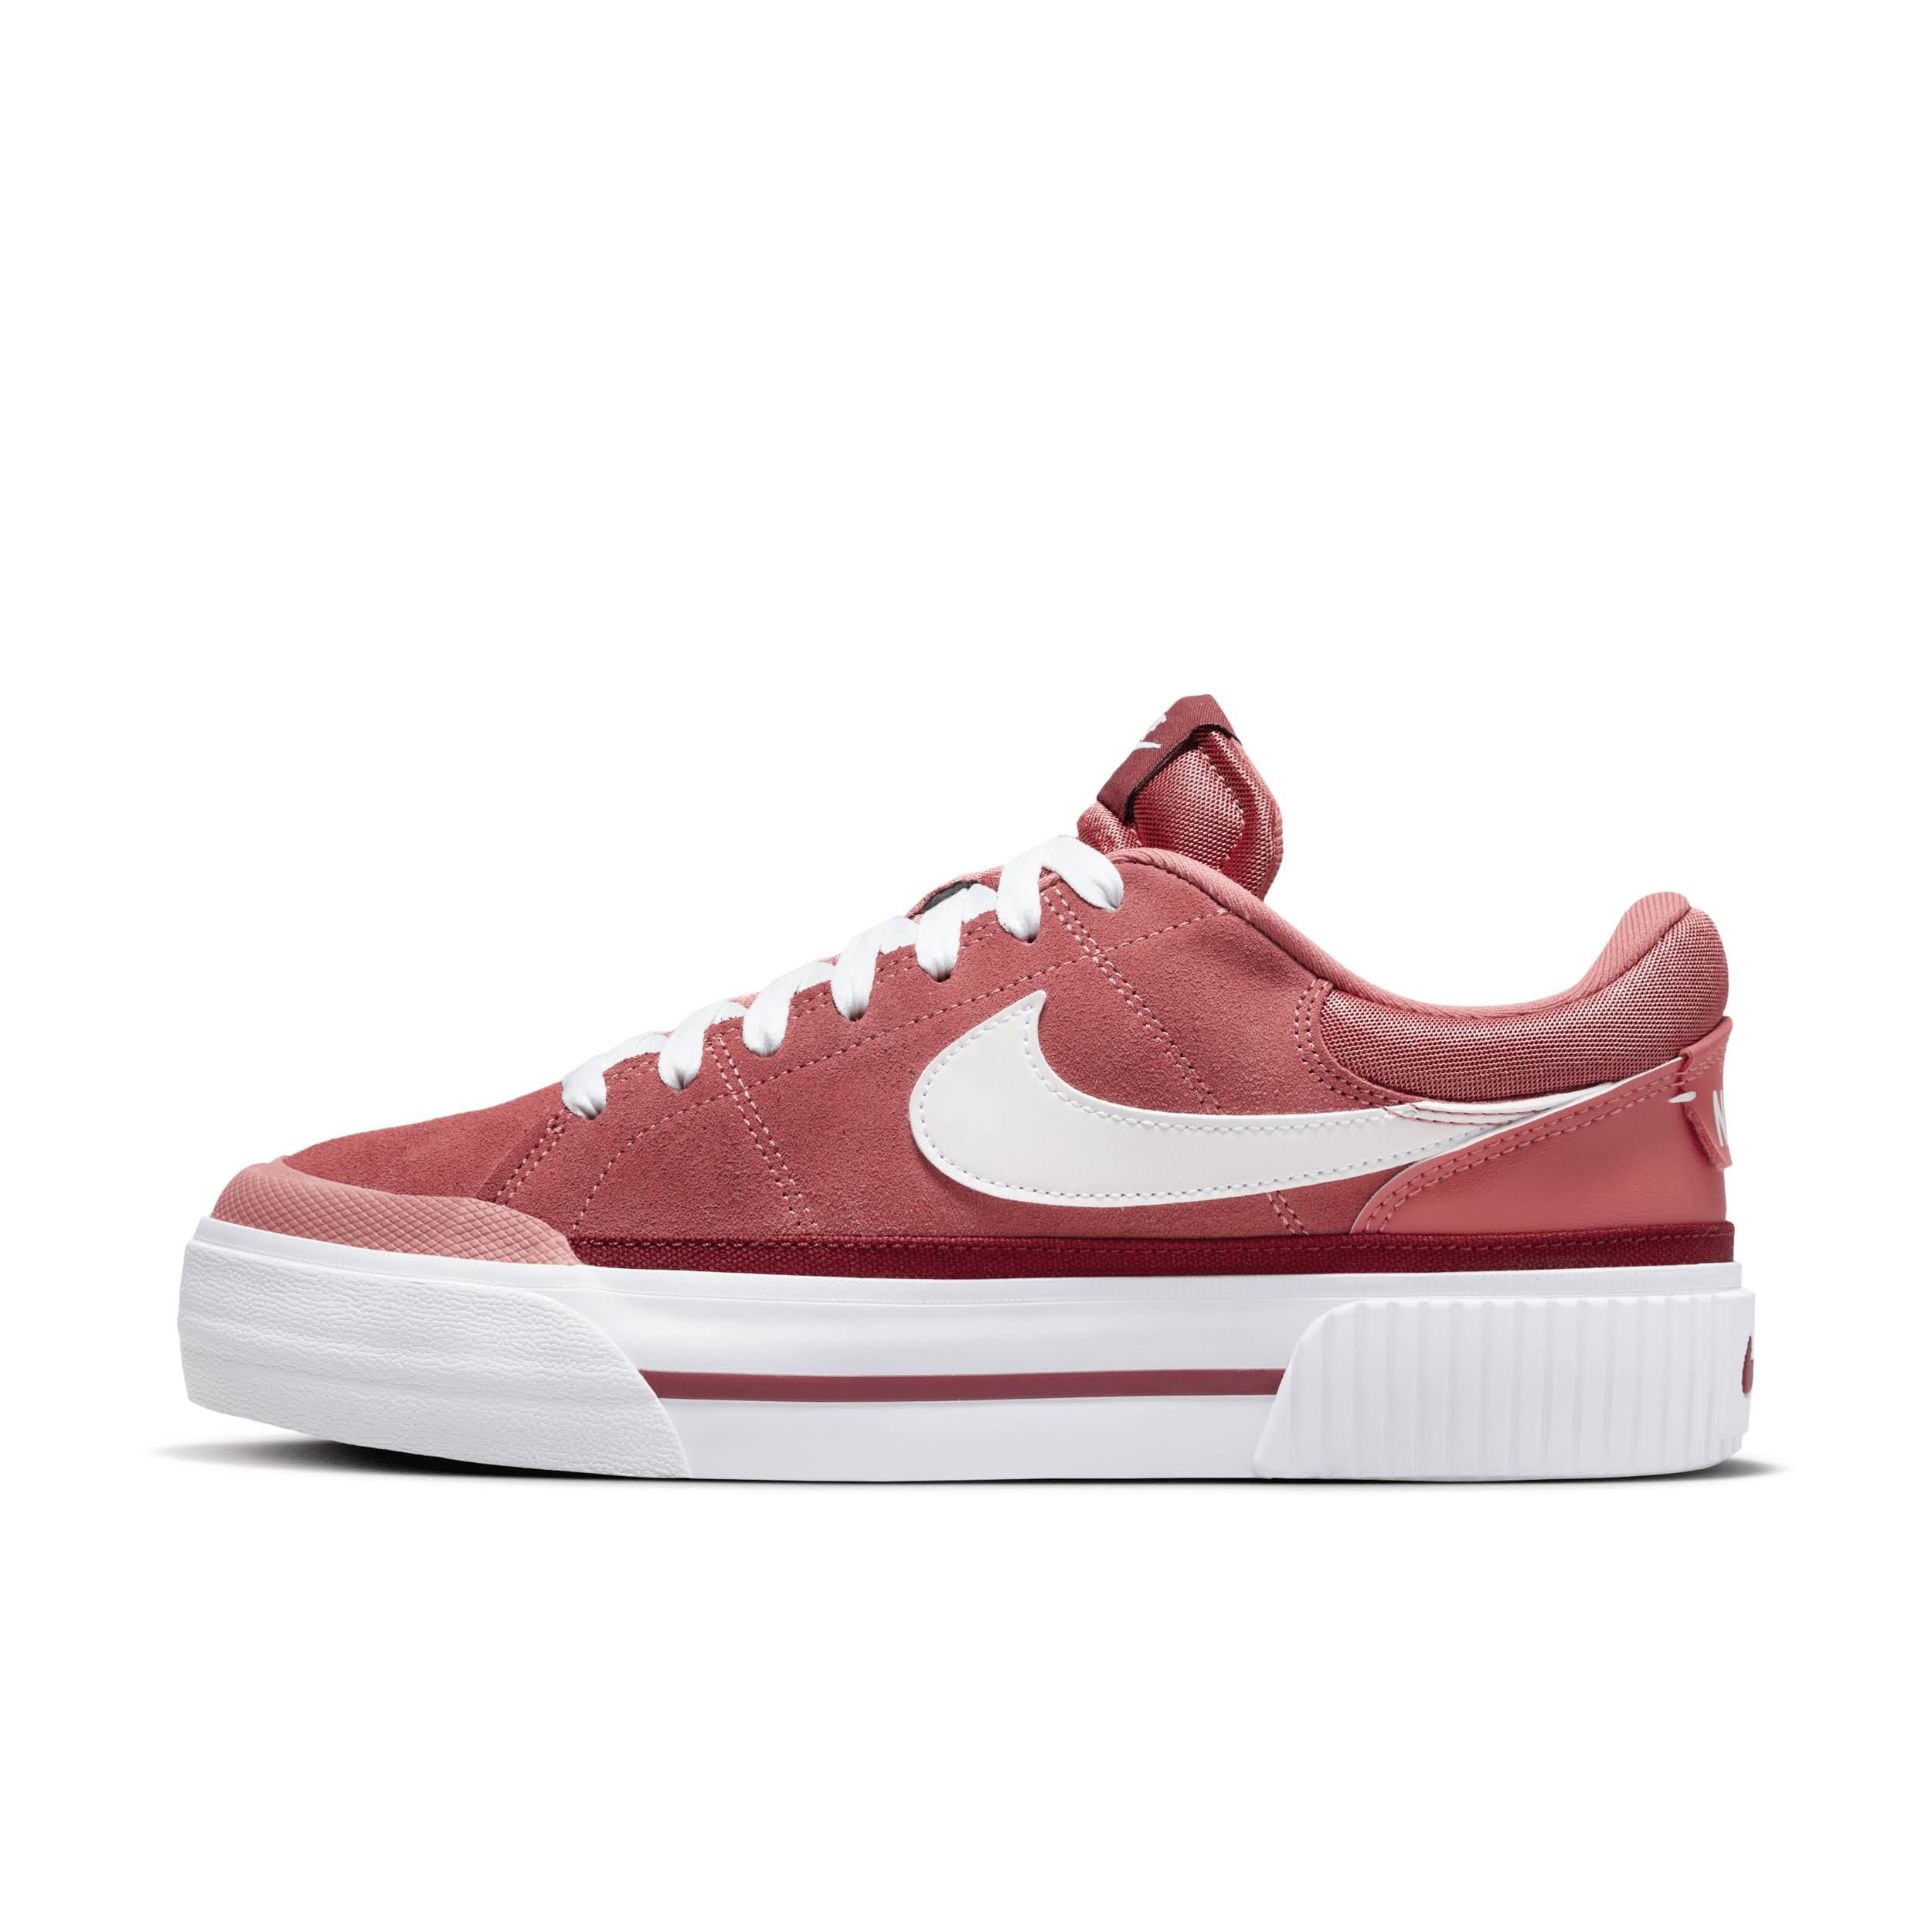 Nike Women's Court Legacy Lift Shoes: Red and Comfortable Volleyball Shoes | Image